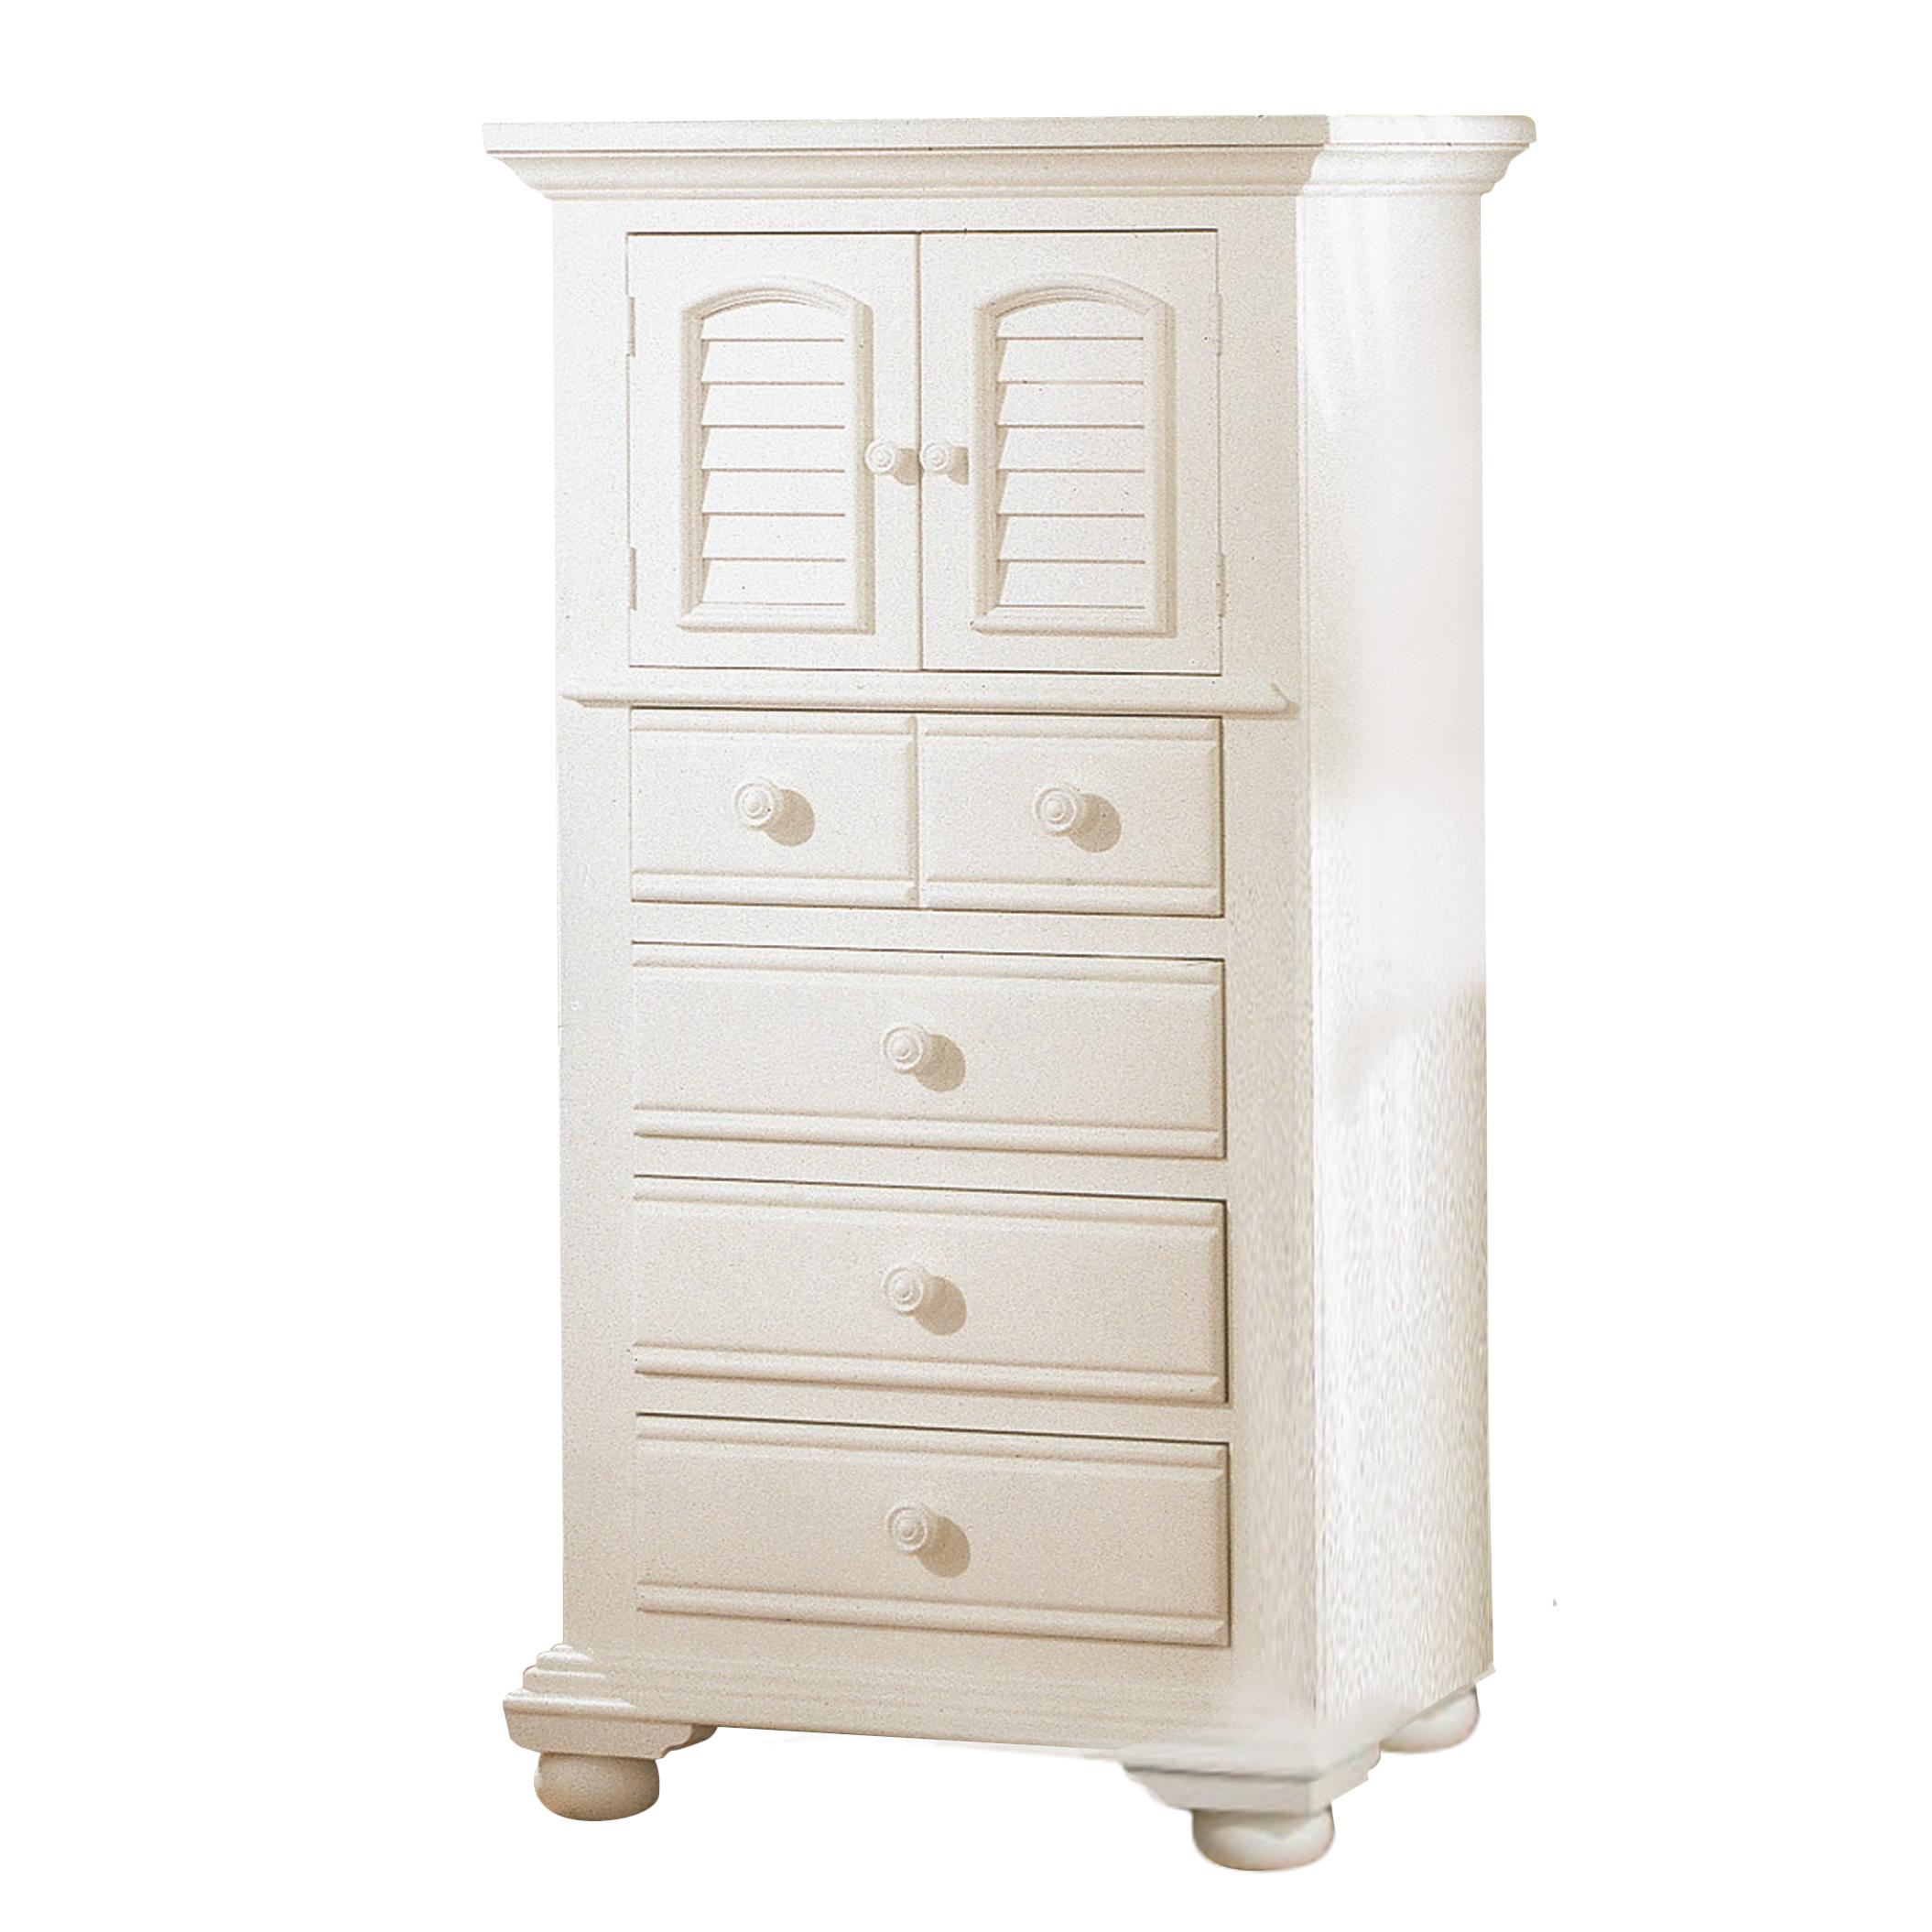 Classic, Traditional, Cottage Chest COTTAGE 6510-142 6510-142 in White 